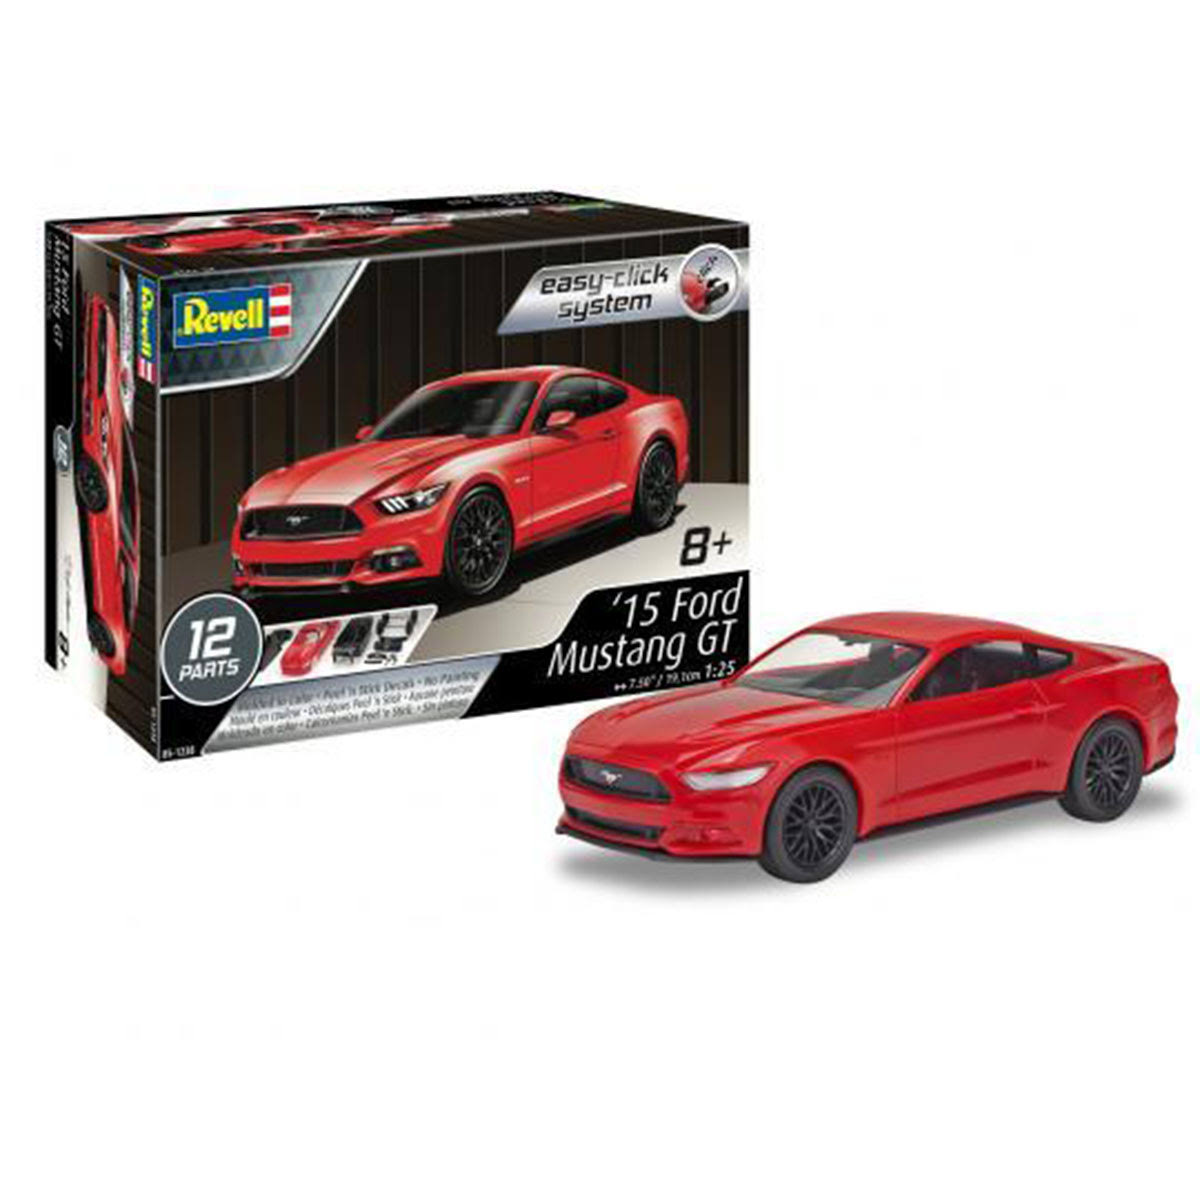 Revell 85-1238 2017 Ford Mustang GT Model Car Kit 1:25 Scale 12-piece Skill Level 2 Plastic Easy-Click Model Building Kit